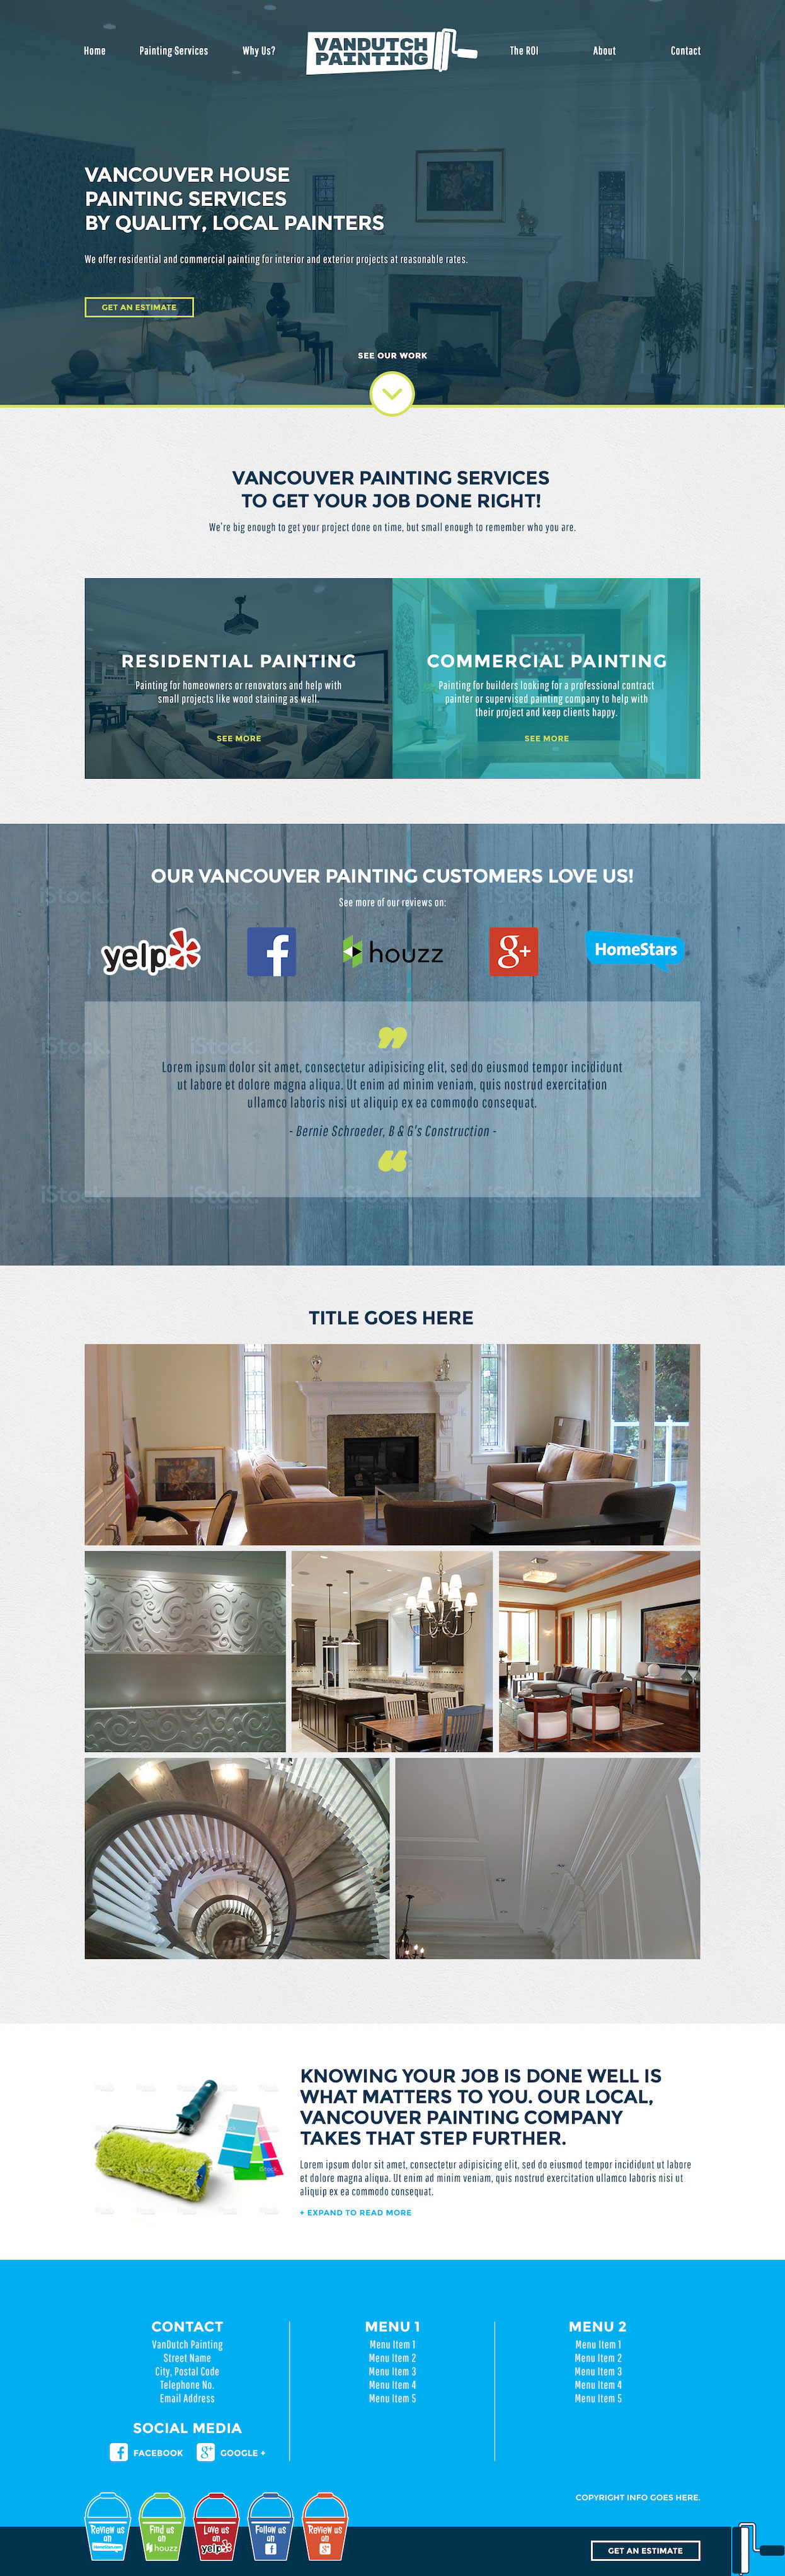 vancouver small business web design for painter home page long view